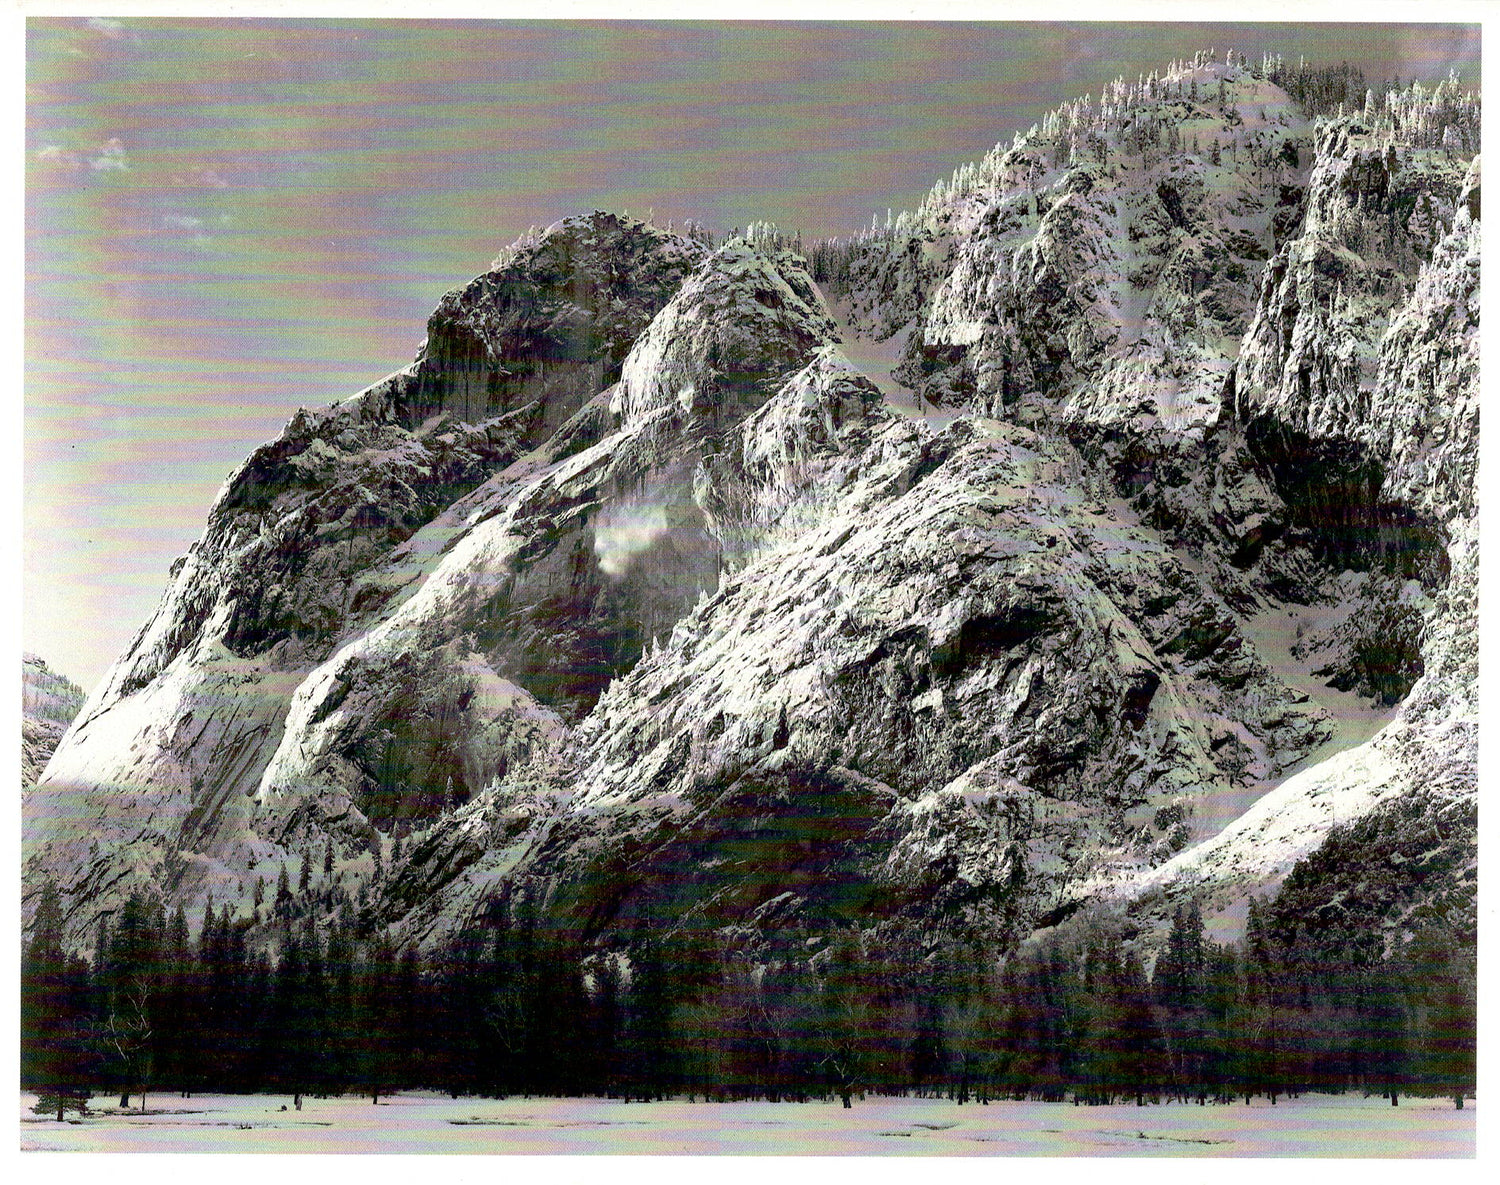 CLIFFS OF GLACIER POINT - ANSEL ADAMS SMALL MATTED REPRODUCTION